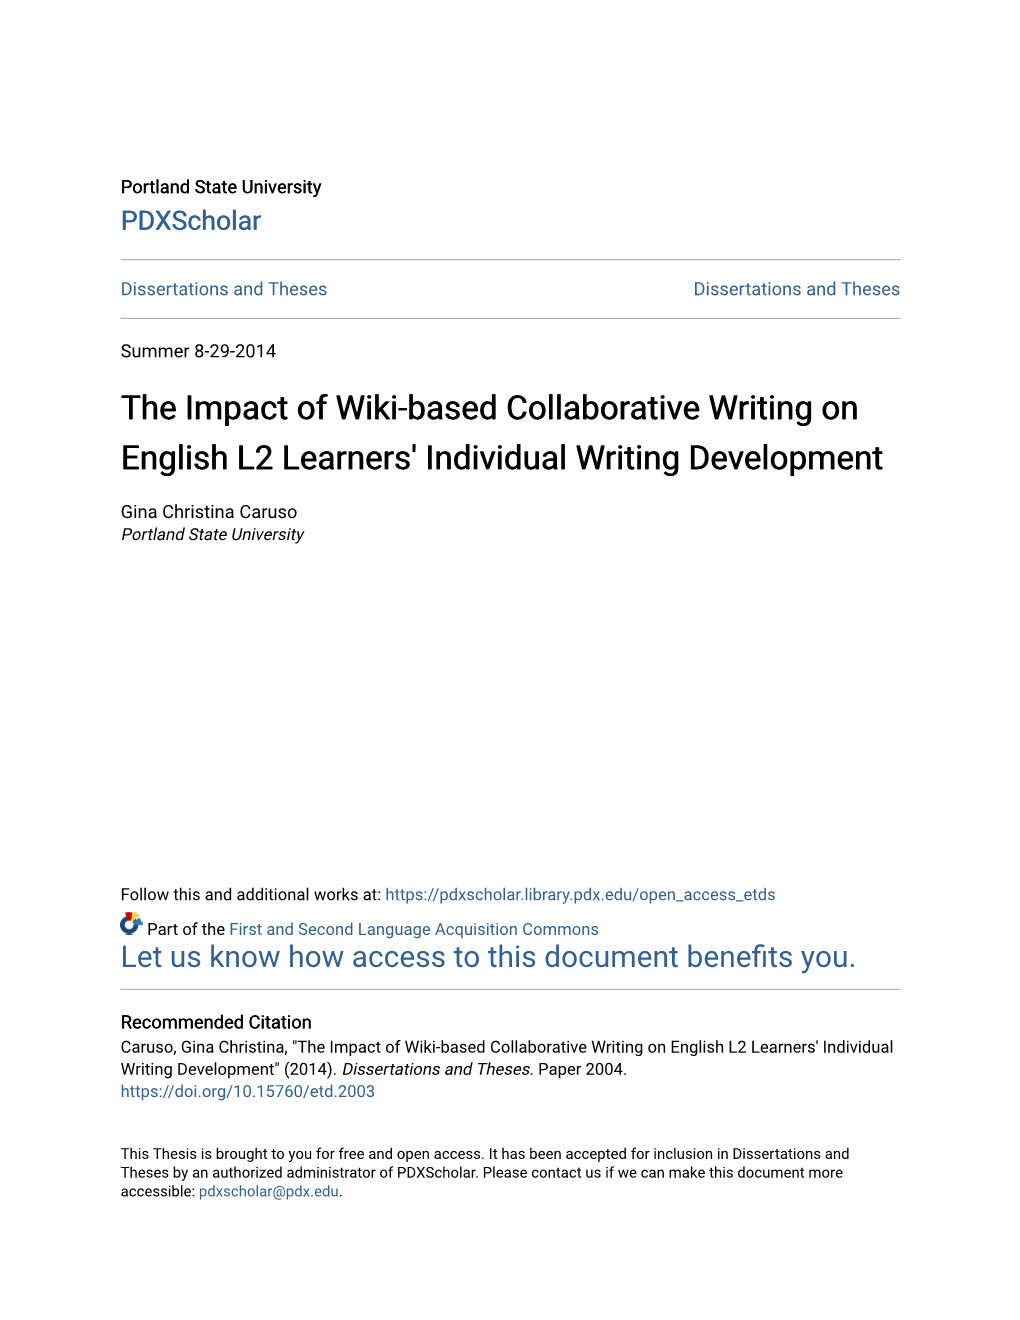 The Impact of Wiki-Based Collaborative Writing on English L2 Learners' Individual Writing Development